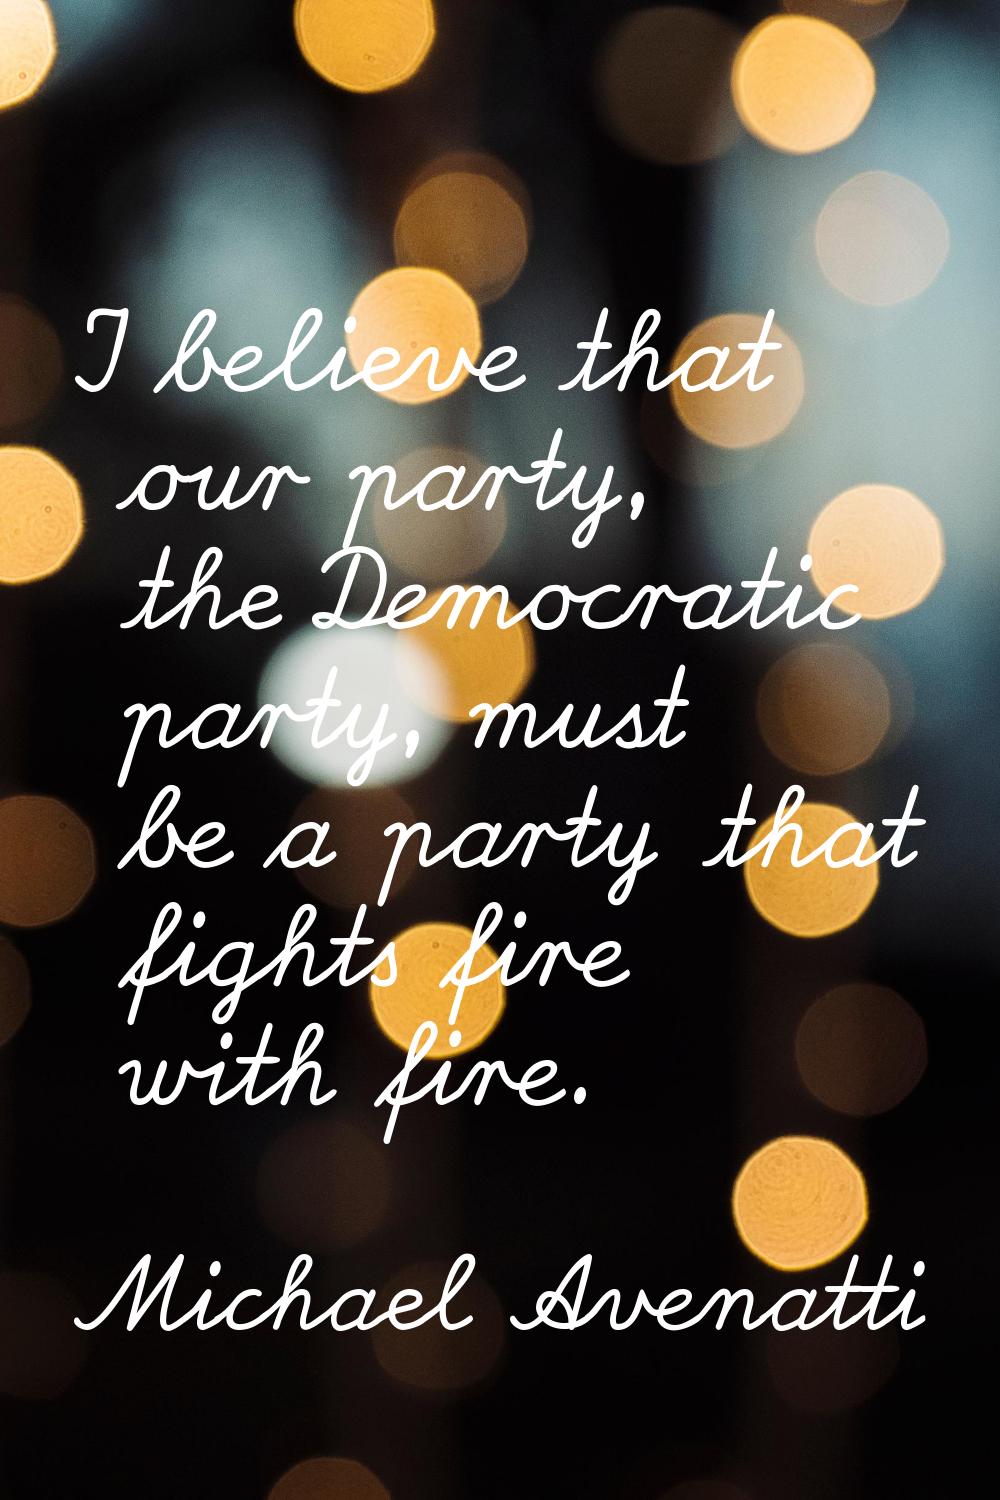 I believe that our party, the Democratic party, must be a party that fights fire with fire.